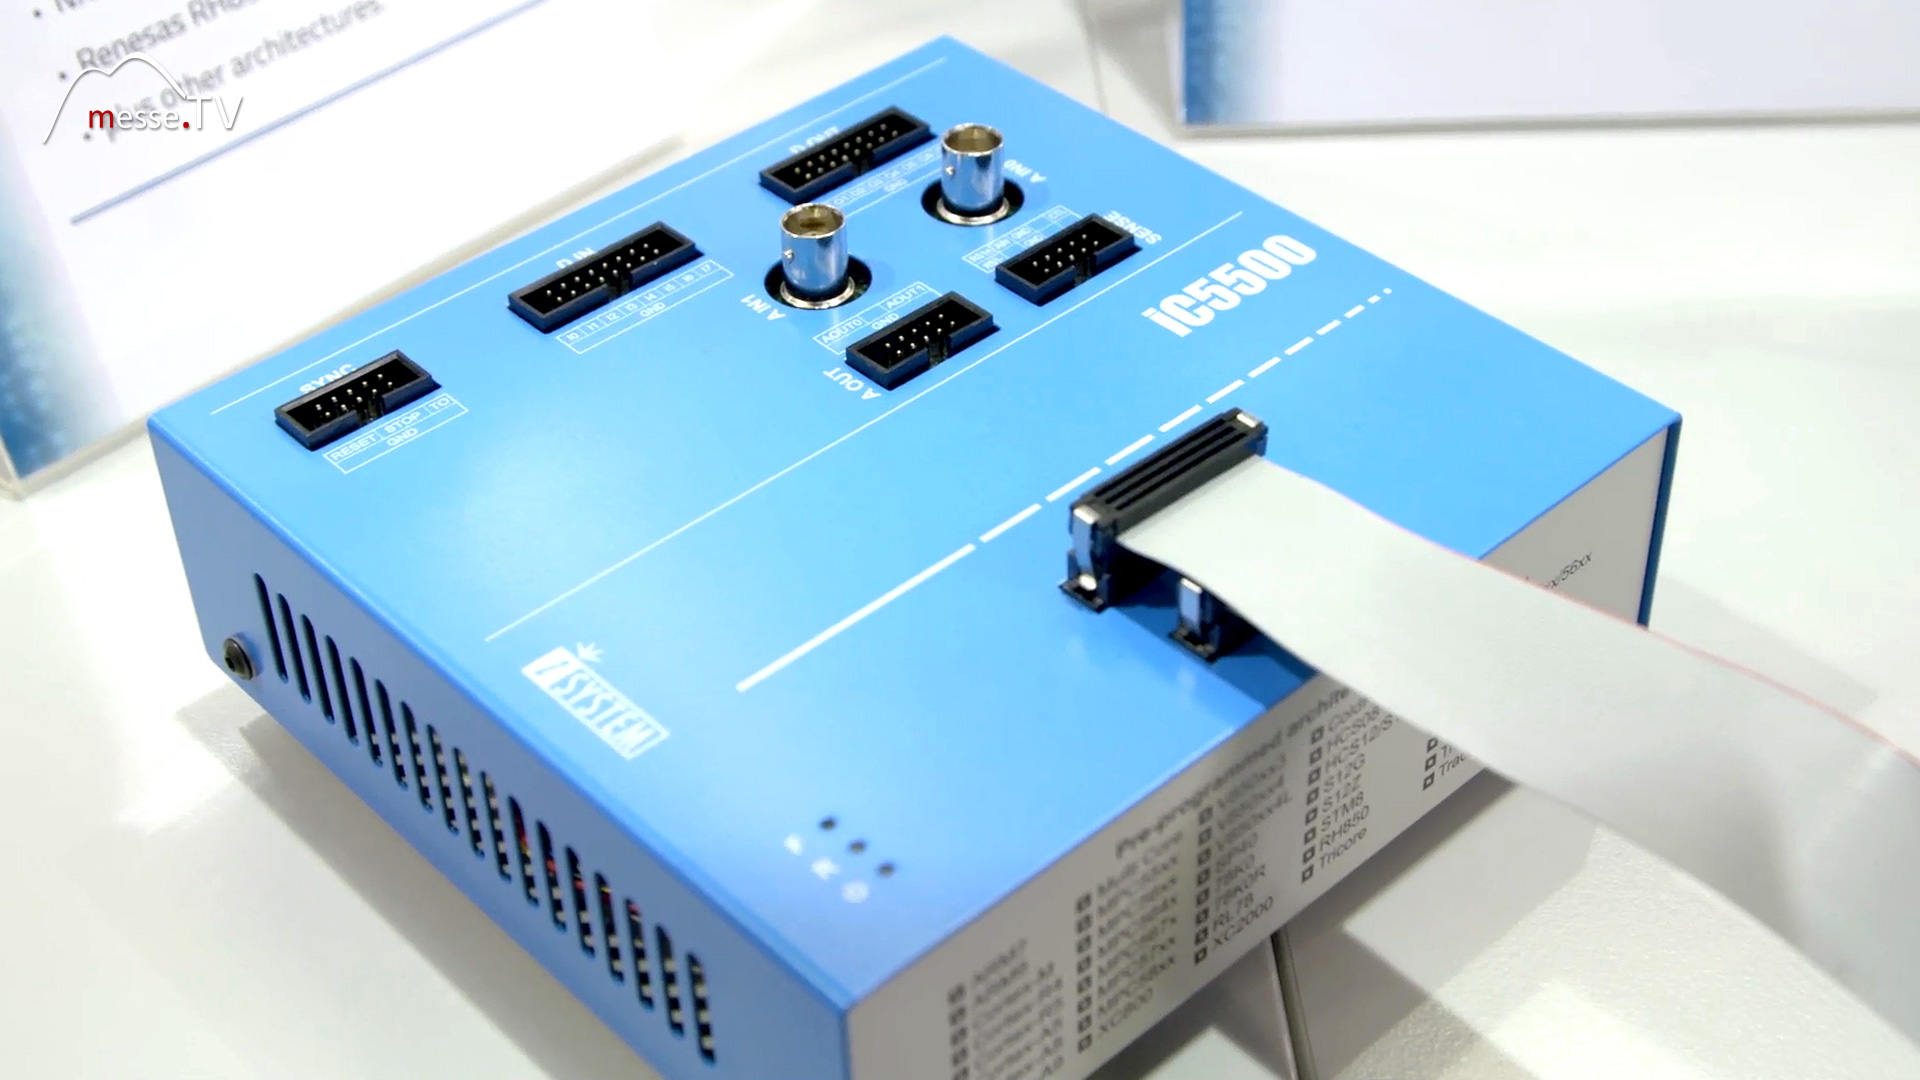 iSystem Blue Box with test software